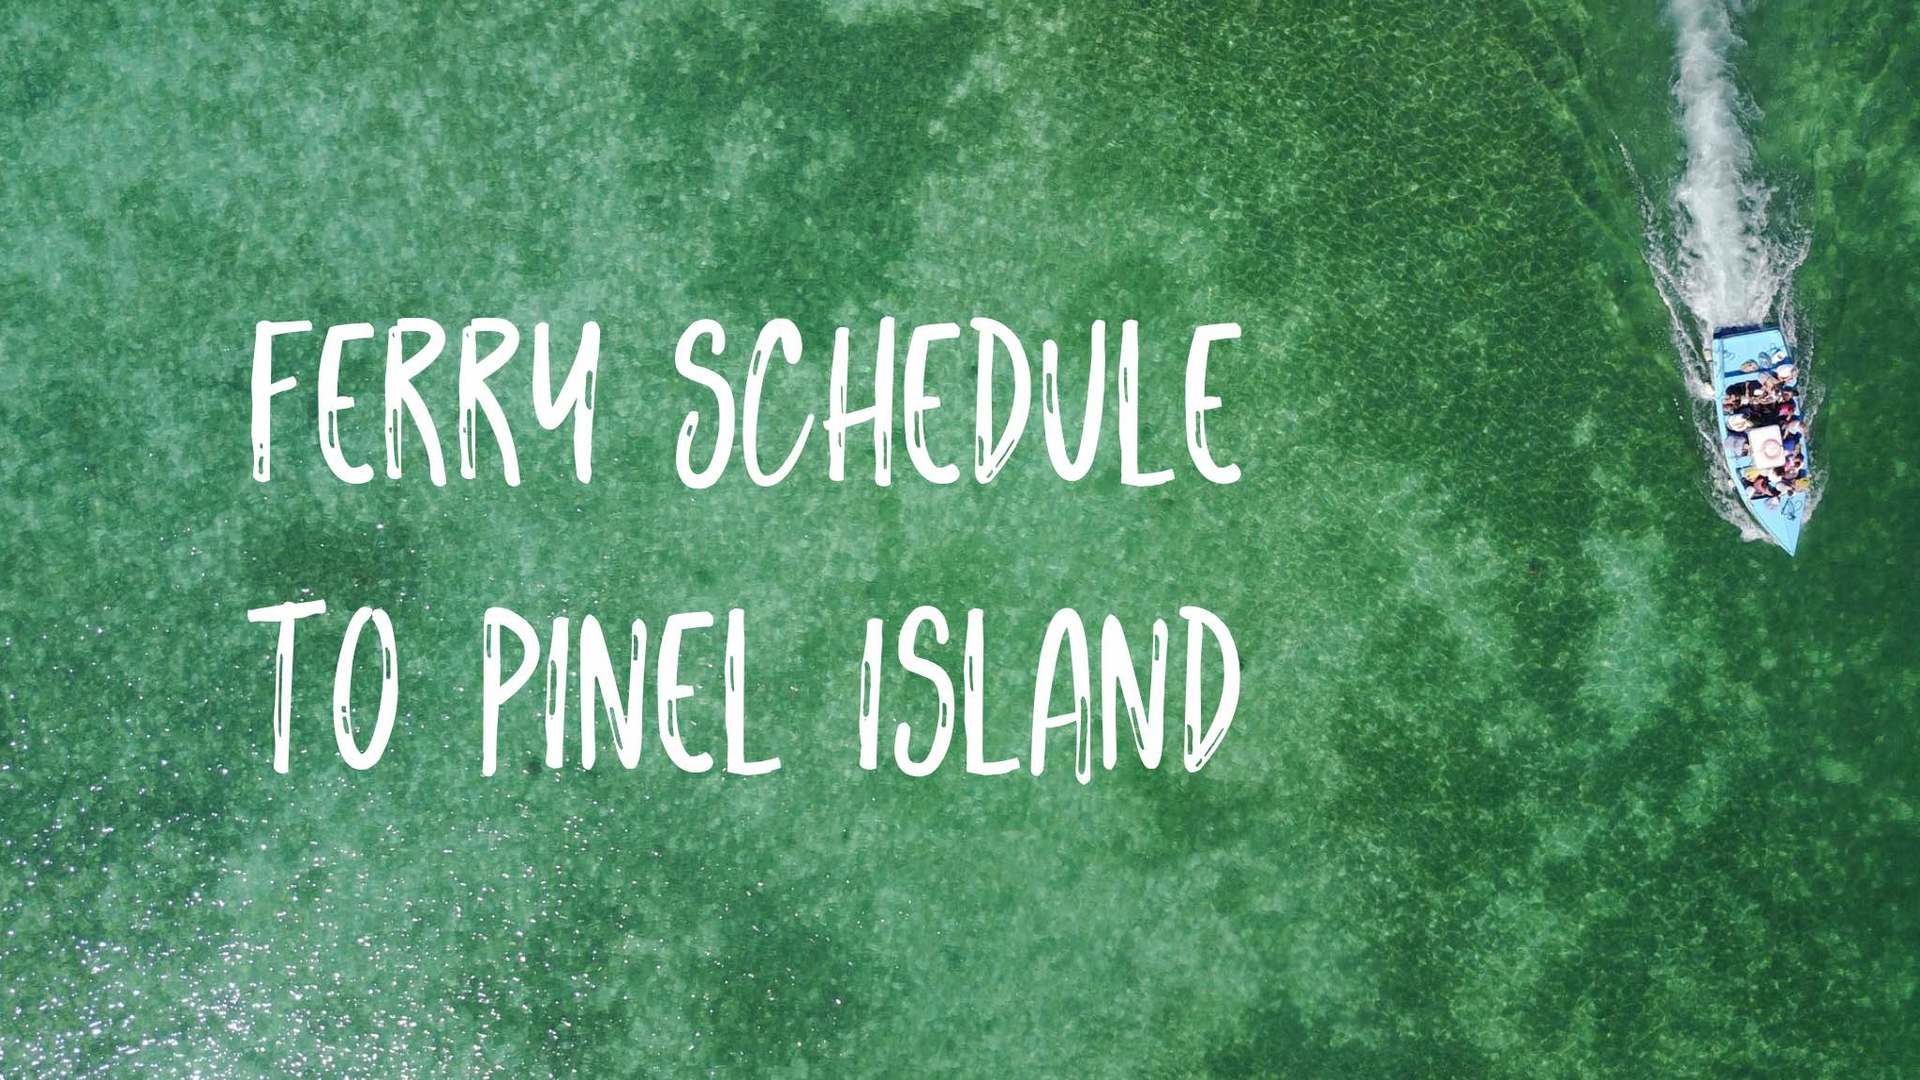 Ferry schedule to Pinel island